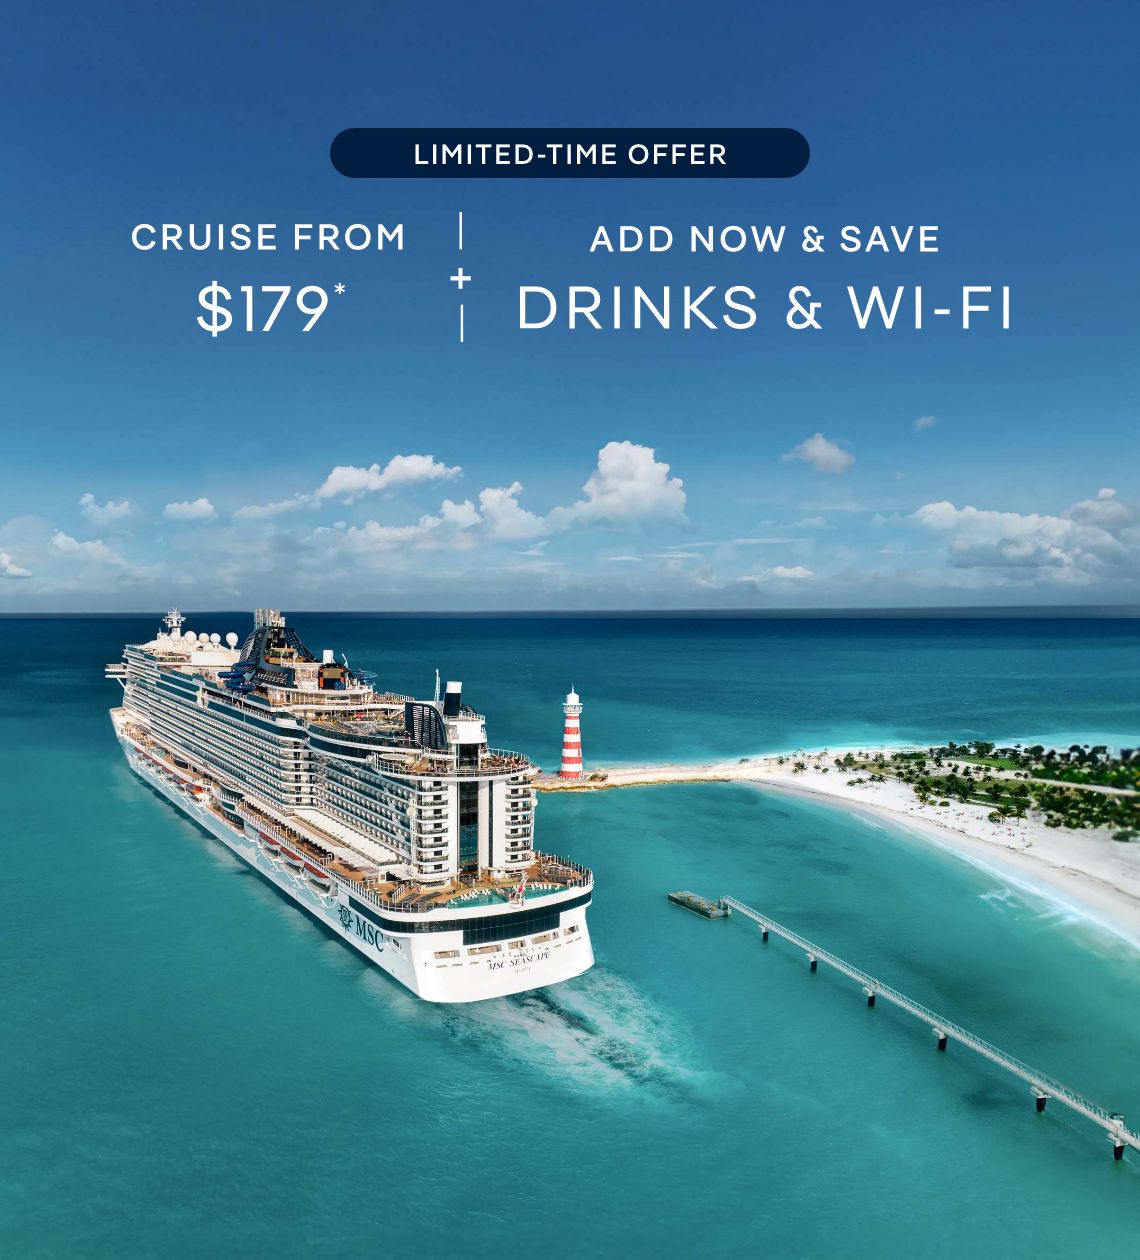 Limited-Time Offer – Cruise From $179 + Add Drinks & Wi‑Fi Now & Save – Click to View Itineraries & Book Now